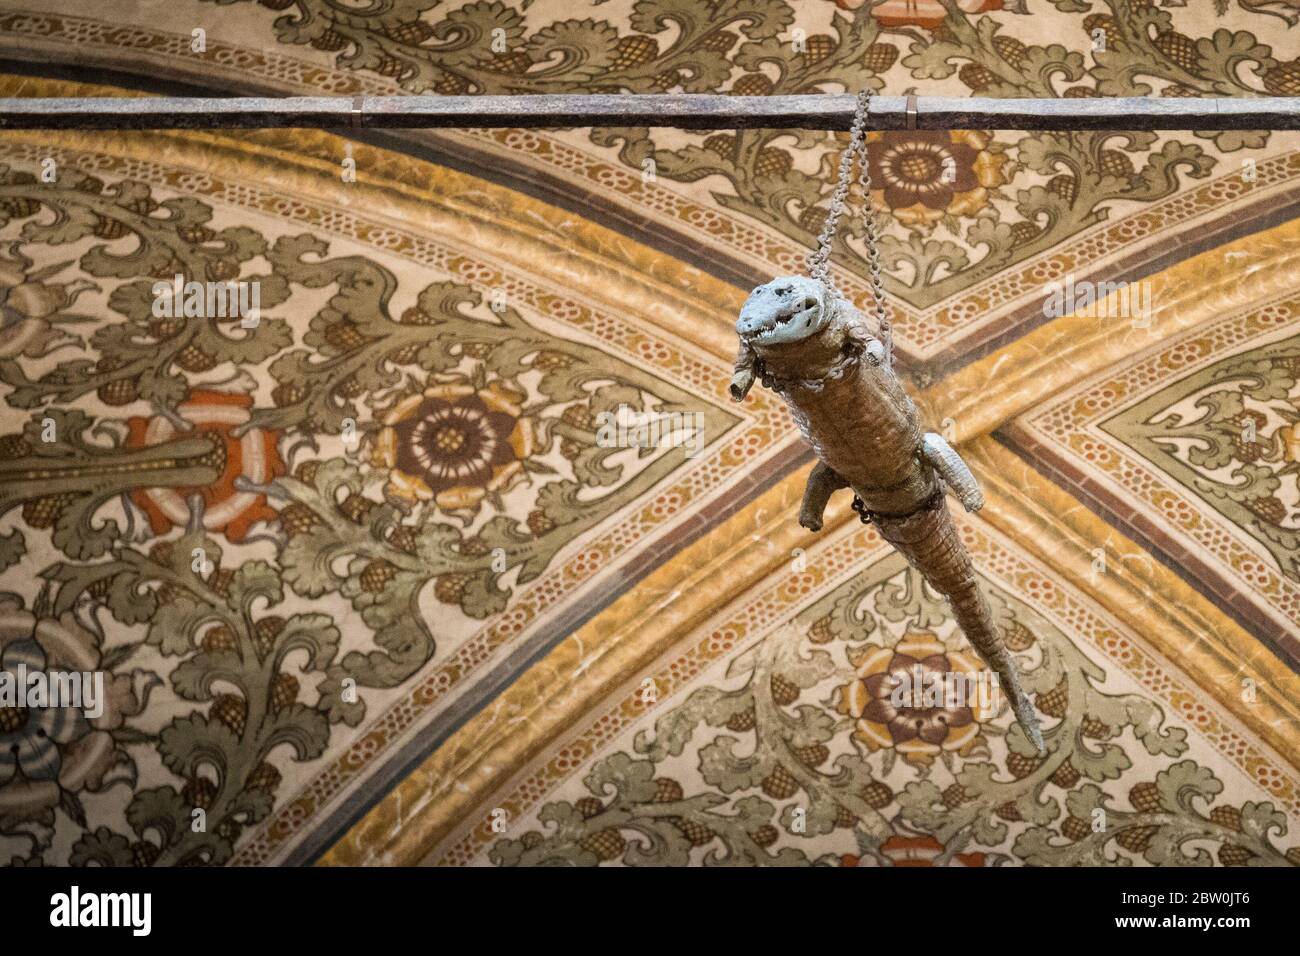 The crocodile hanging from the ceiling in the Sanctuary of Santa Maria delle Grazie, Curtatone, Province of Mantua, Italy. The stuffed animal is suppo Stock Photo